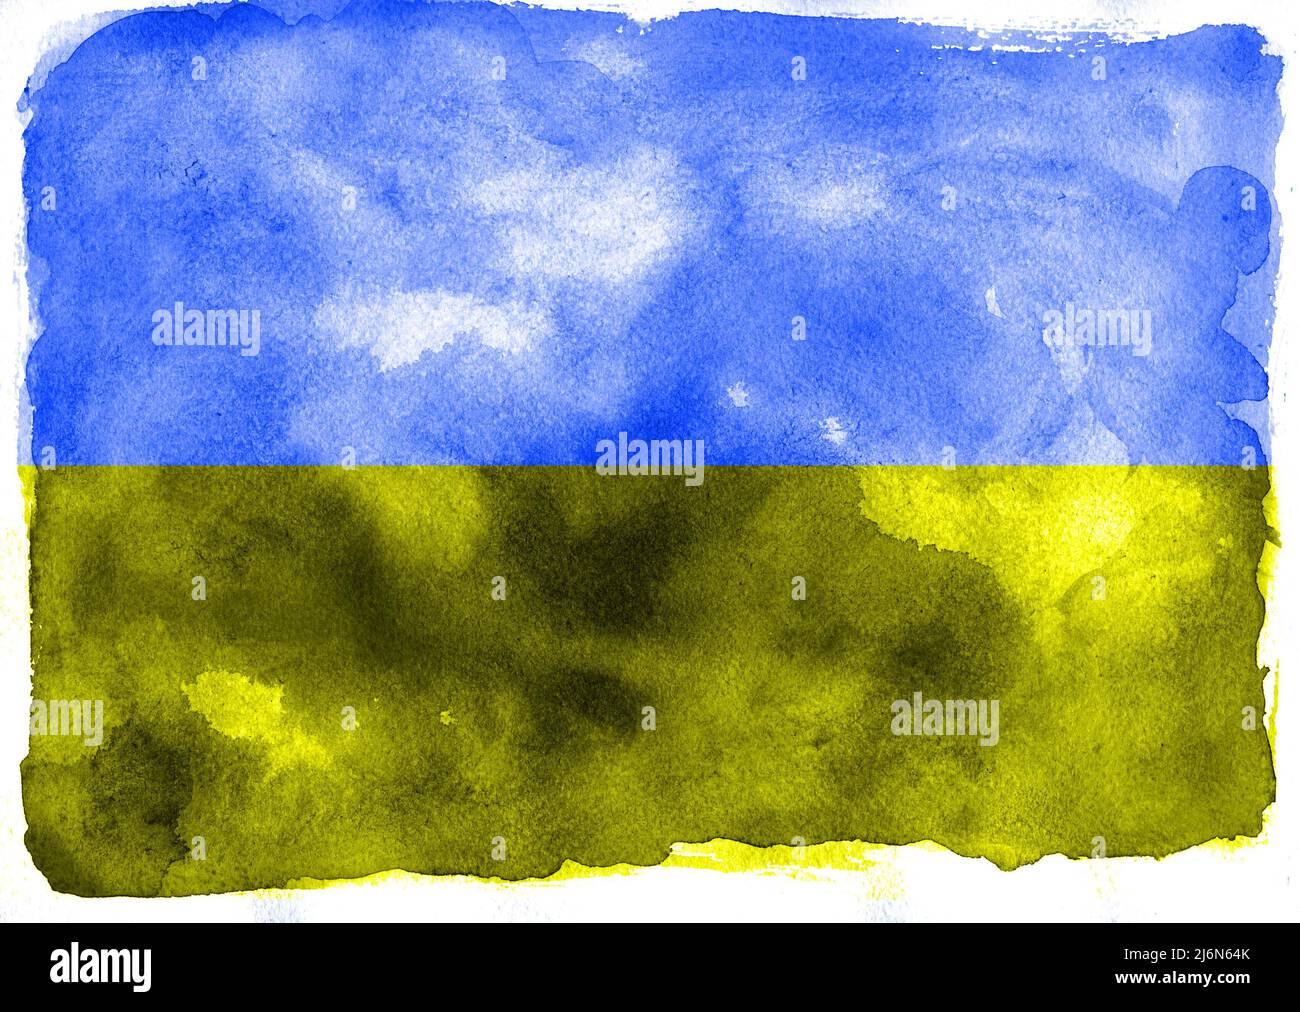 Blue and yellow Ukrainian flag from watercolor pattern Stock Photo